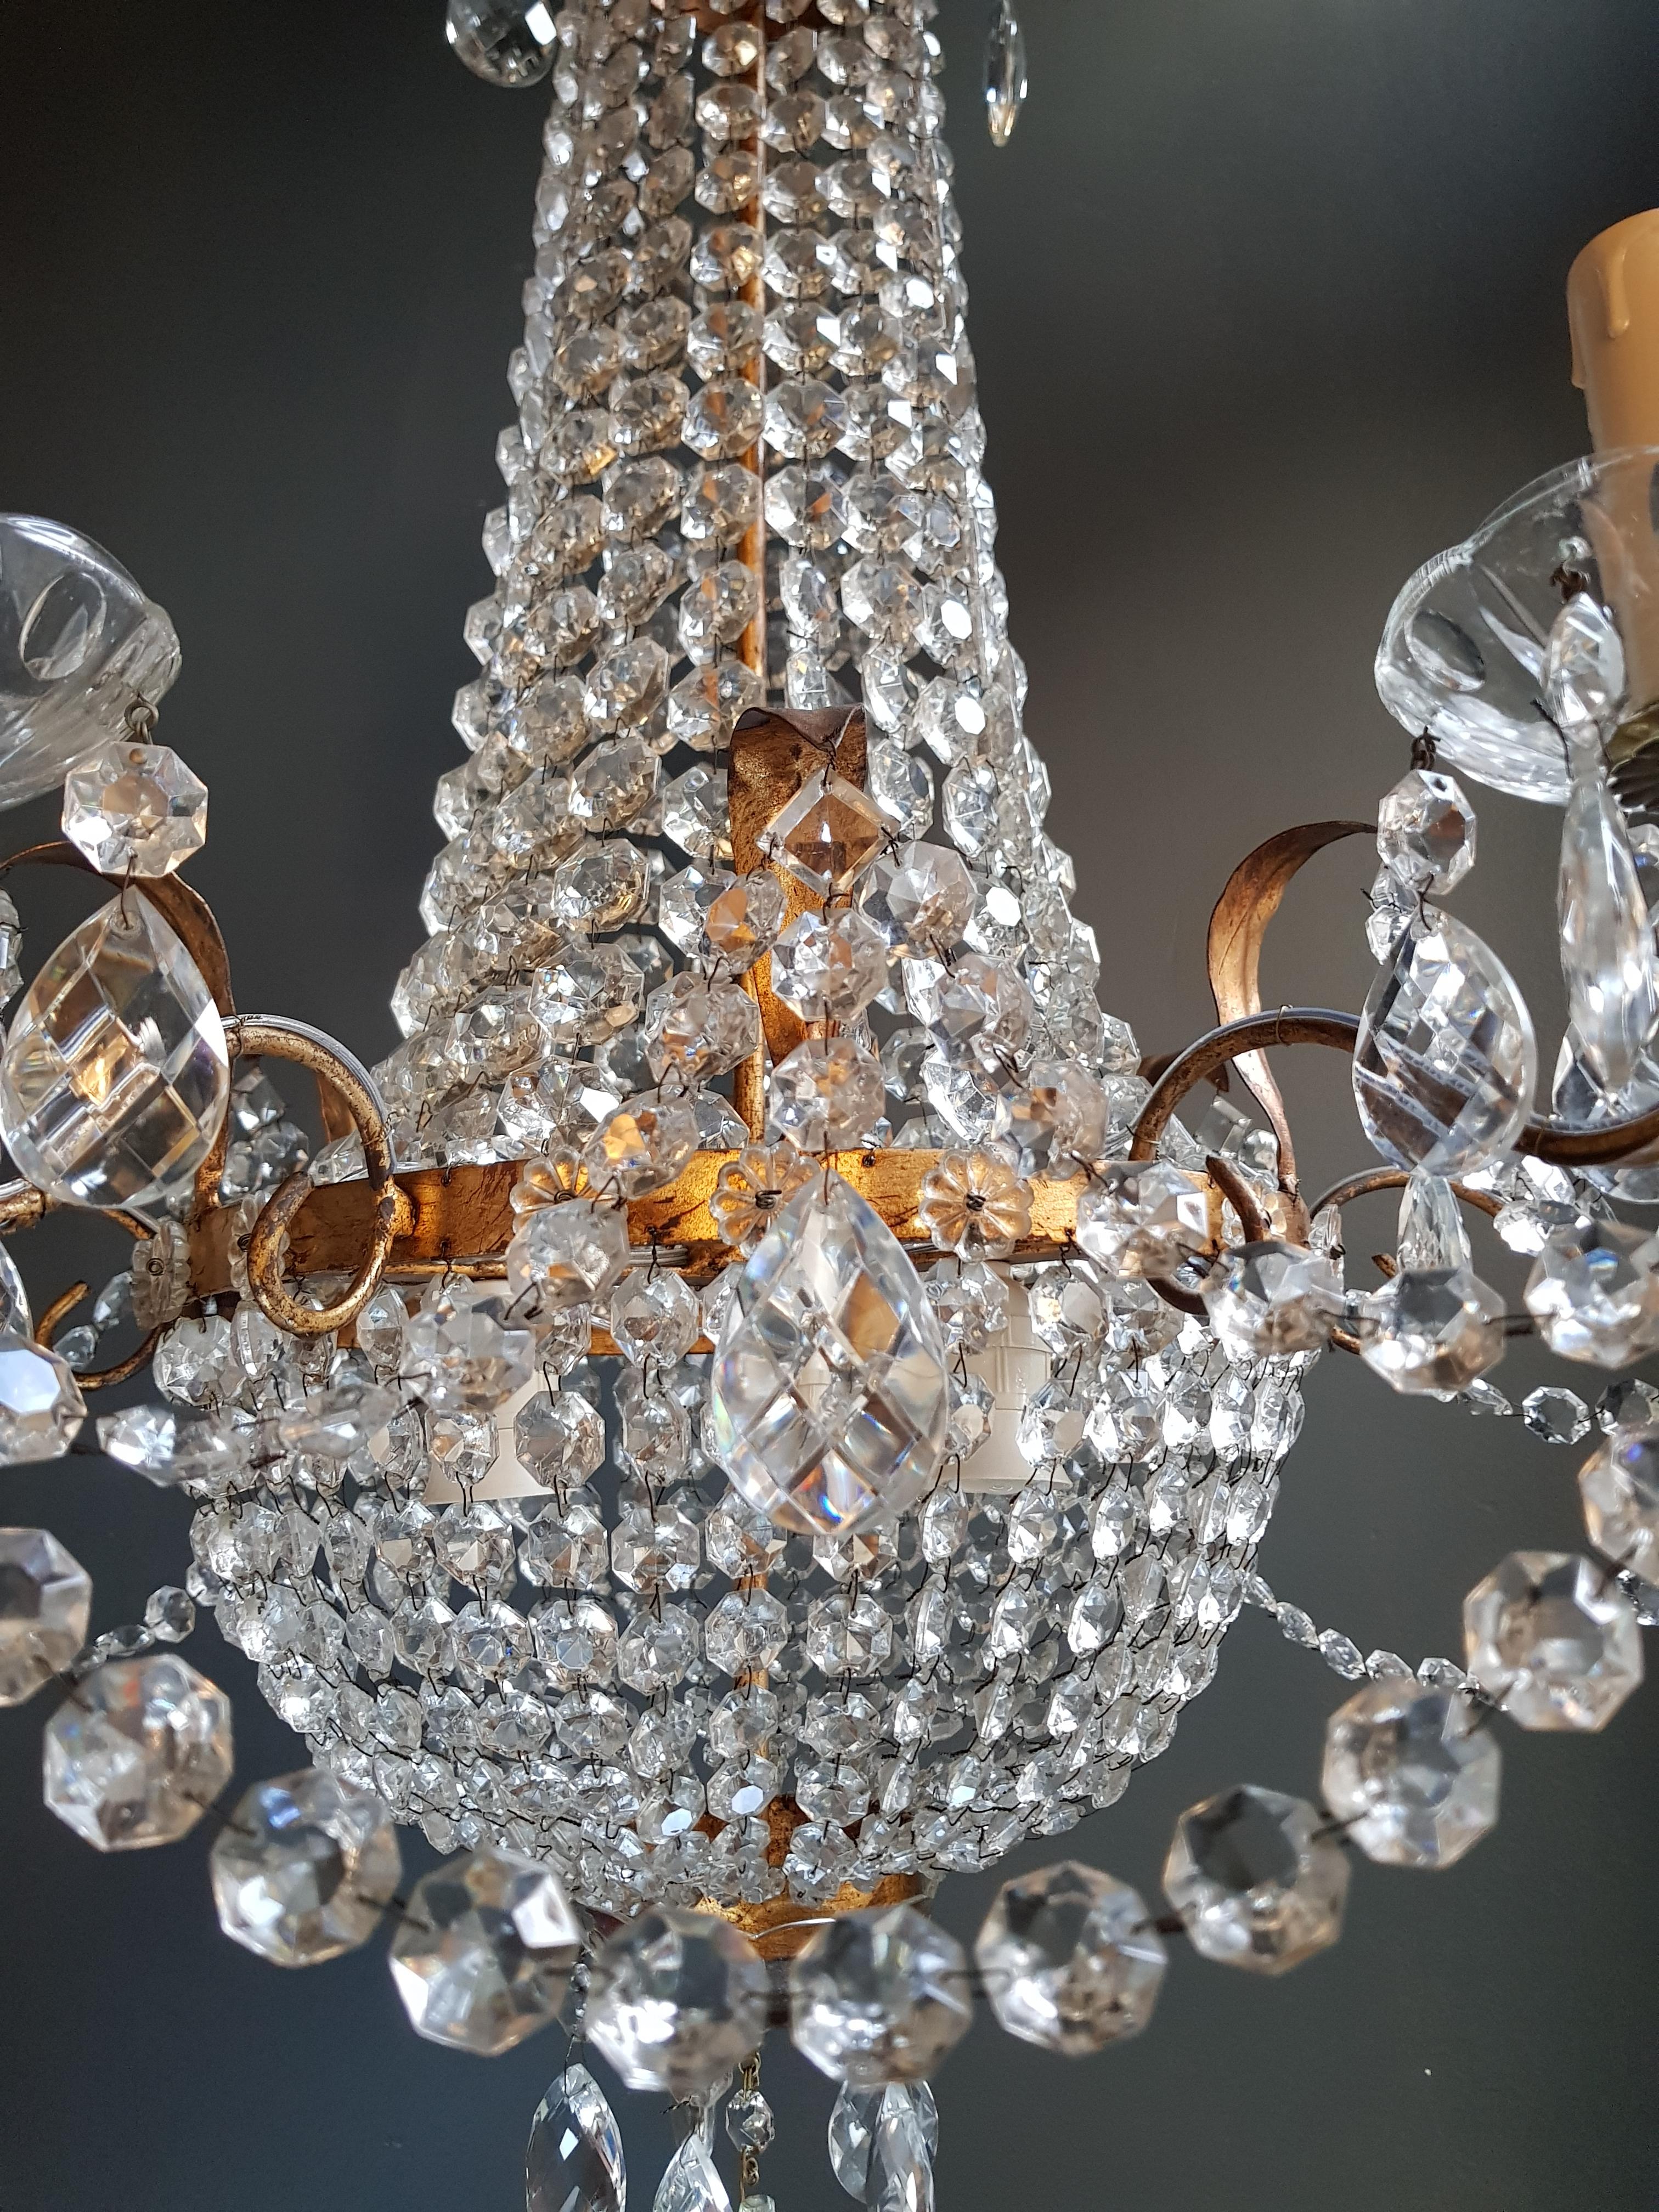 Empire Sac a pearl iron chandelier crystal lustre ceiling lamp basket antique, 1940

Measures: Total height 130 cm, height without chain 75 cm, diameter 70 cm. Weight (approximately): 13kg.

Number of lights: 9-light bulb sockets: 6x E14 and 3 x